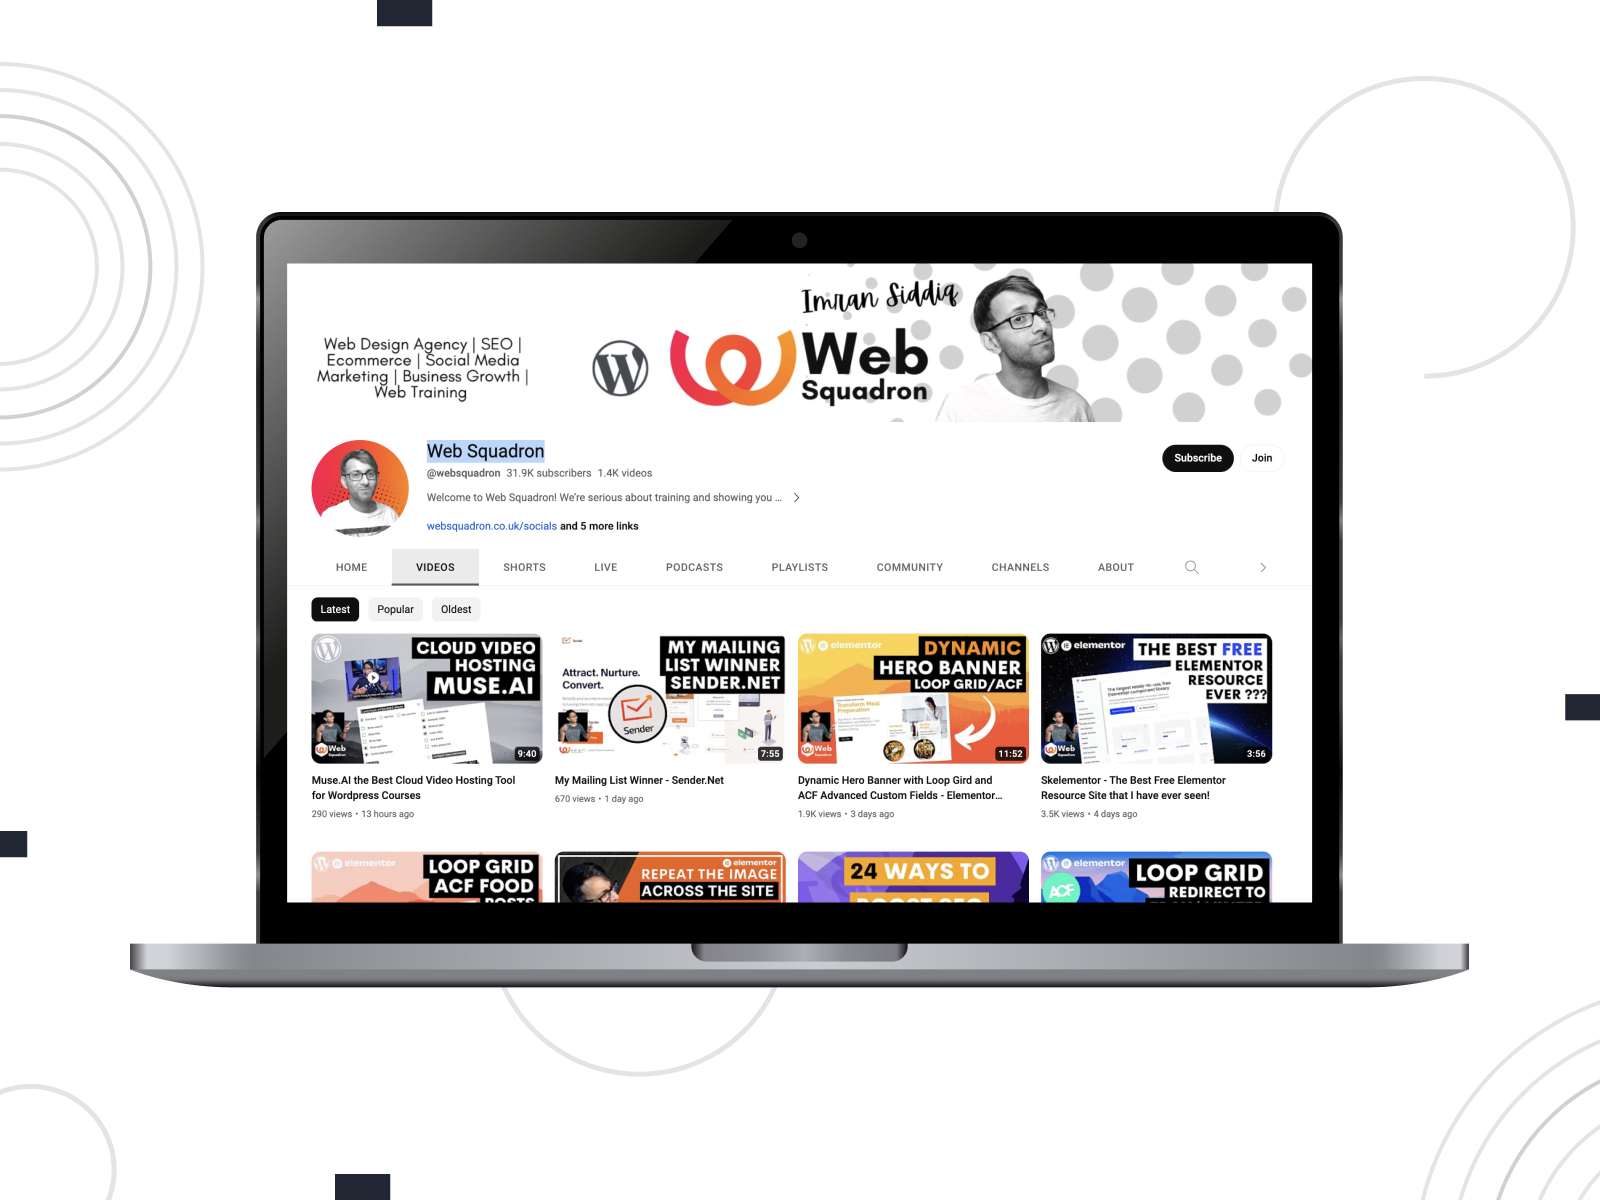 Impression of Web Squadron, a content-rich channel with tons of educational videos for WordPress beginners & pros alongside SEO & website-building tutorials.